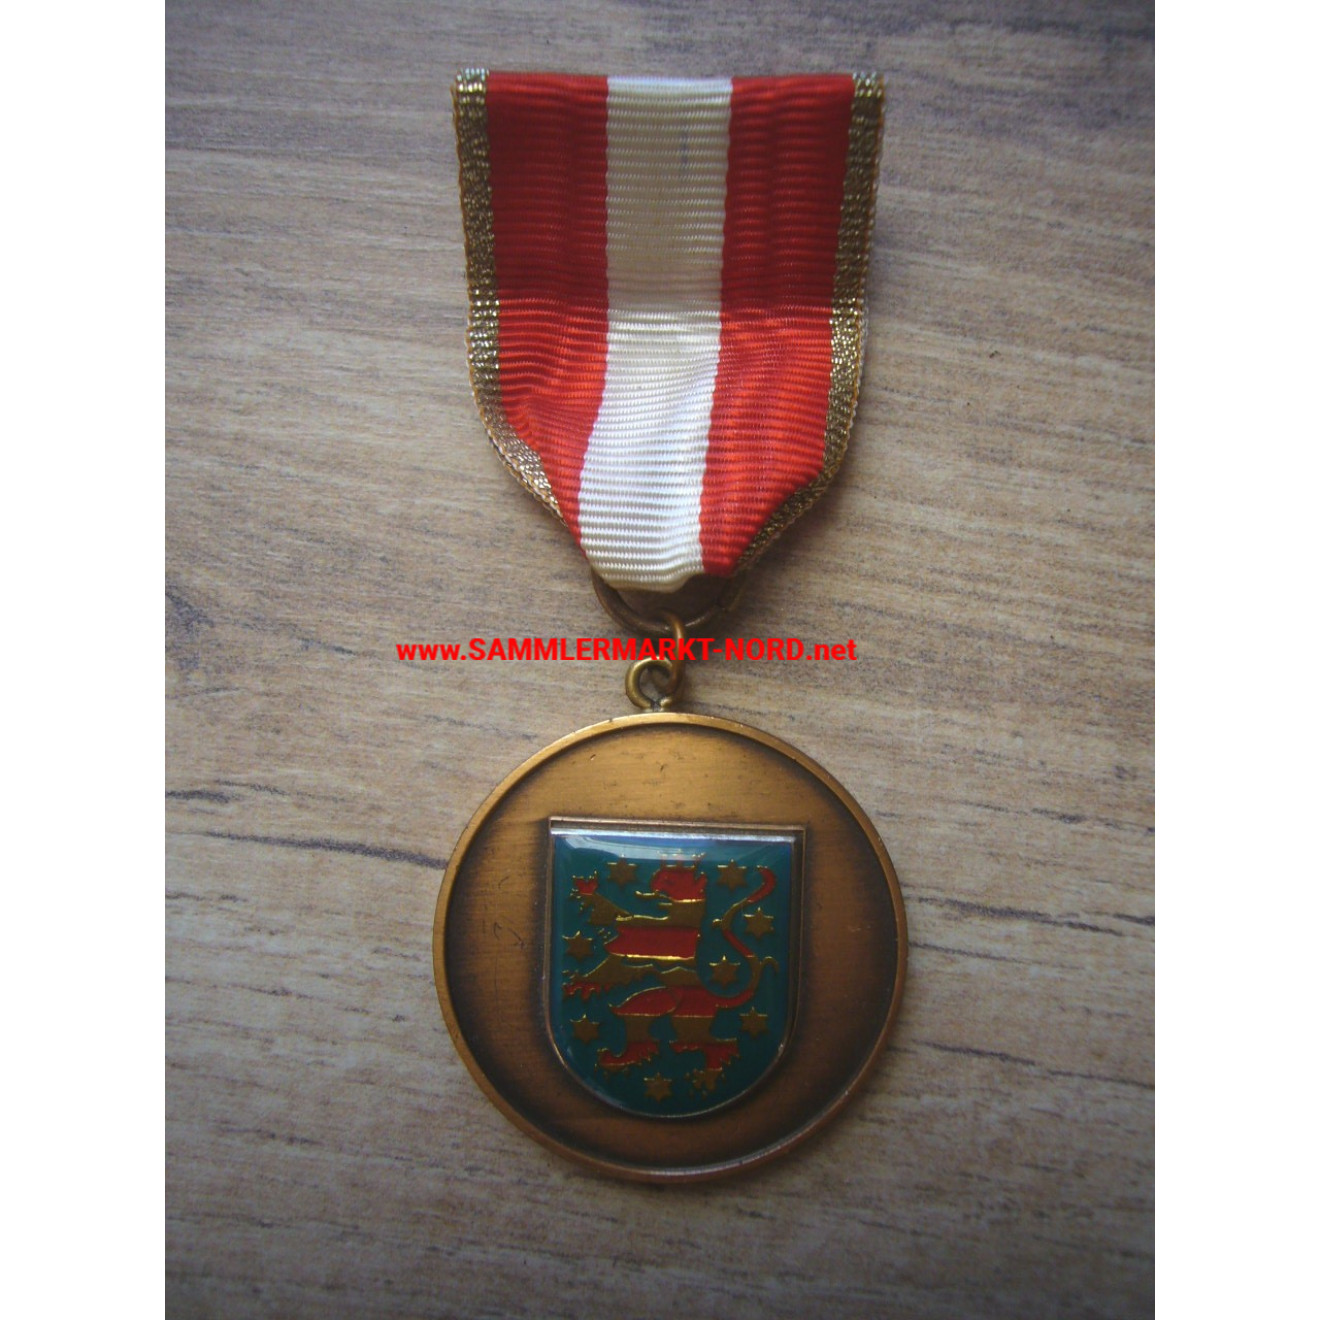 Fire brigade Thuringia - Medal for services in fire protection